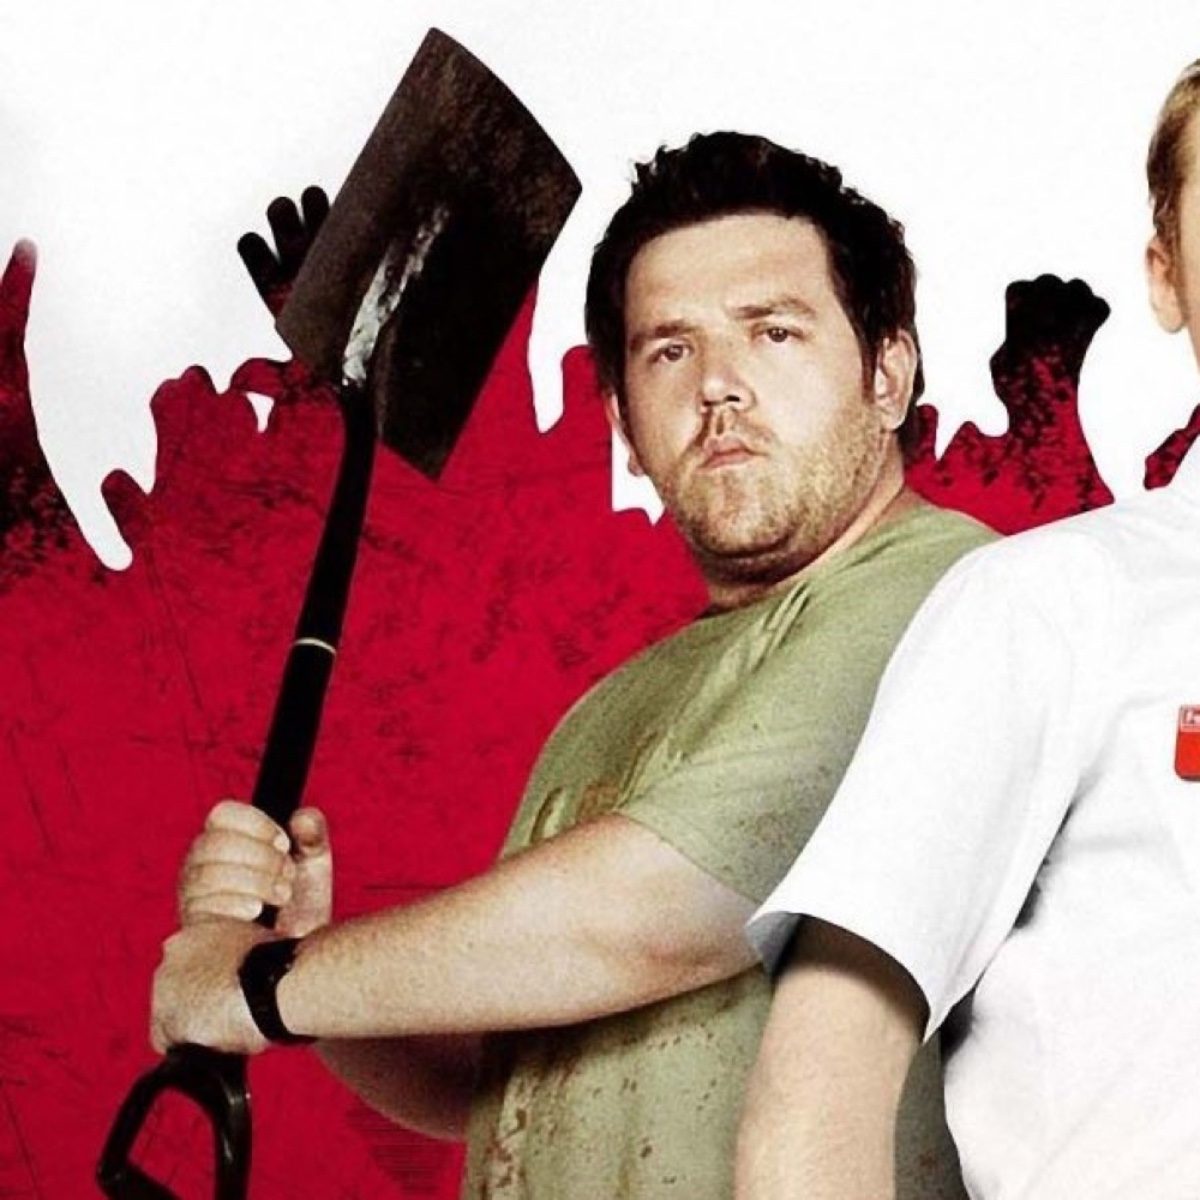 Shaun of the Dead Costume - Shaun of the Dead Fancy Dress - Shaun and Ed Cosplay - Ed Shorts